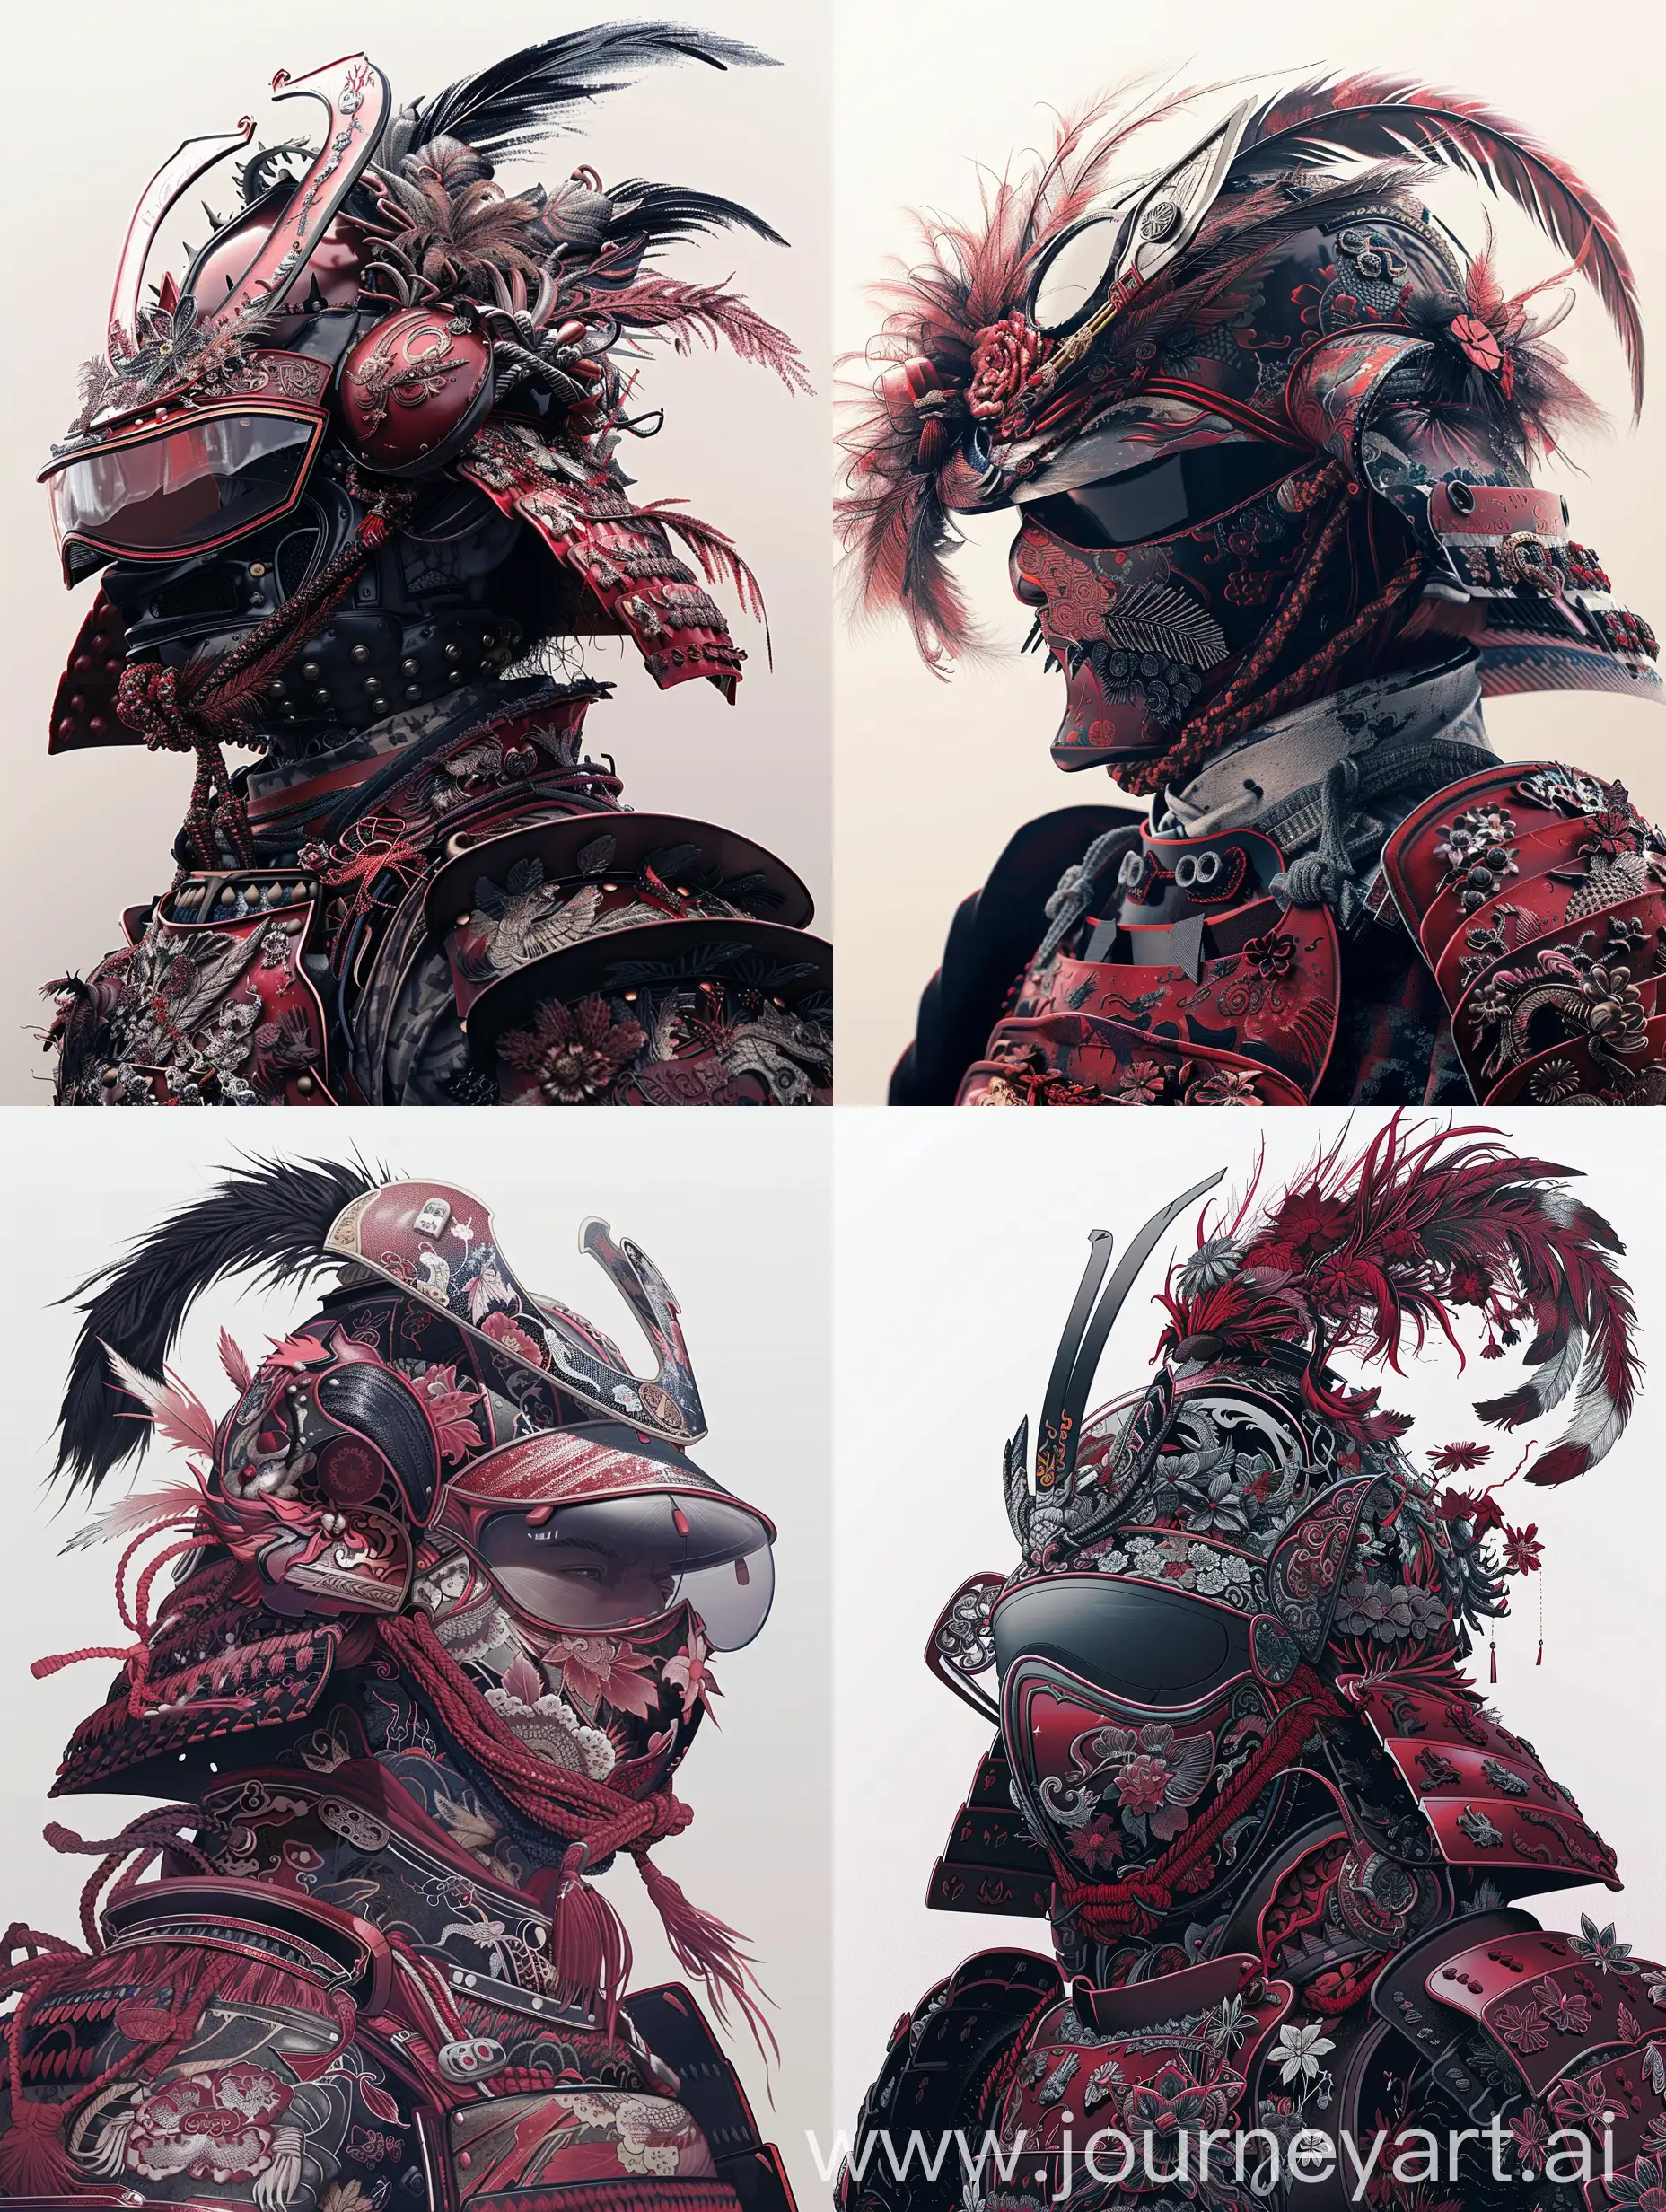 A highly detailed and ornate samurai warrior wears an elaborate suit of armor in various shades of Red. The helmet features intricate decorations with feathered and floral elements, a large, curved crest and detailed embellishments. The mask and armor plates are adorned with delicate patterns, including flowers and dragons, and the samurai's face is partially hidden behind tinted goggles. The overall color scheme is predominantly Black, creating a visually striking and unique look. The background is a plain, light white gradient.